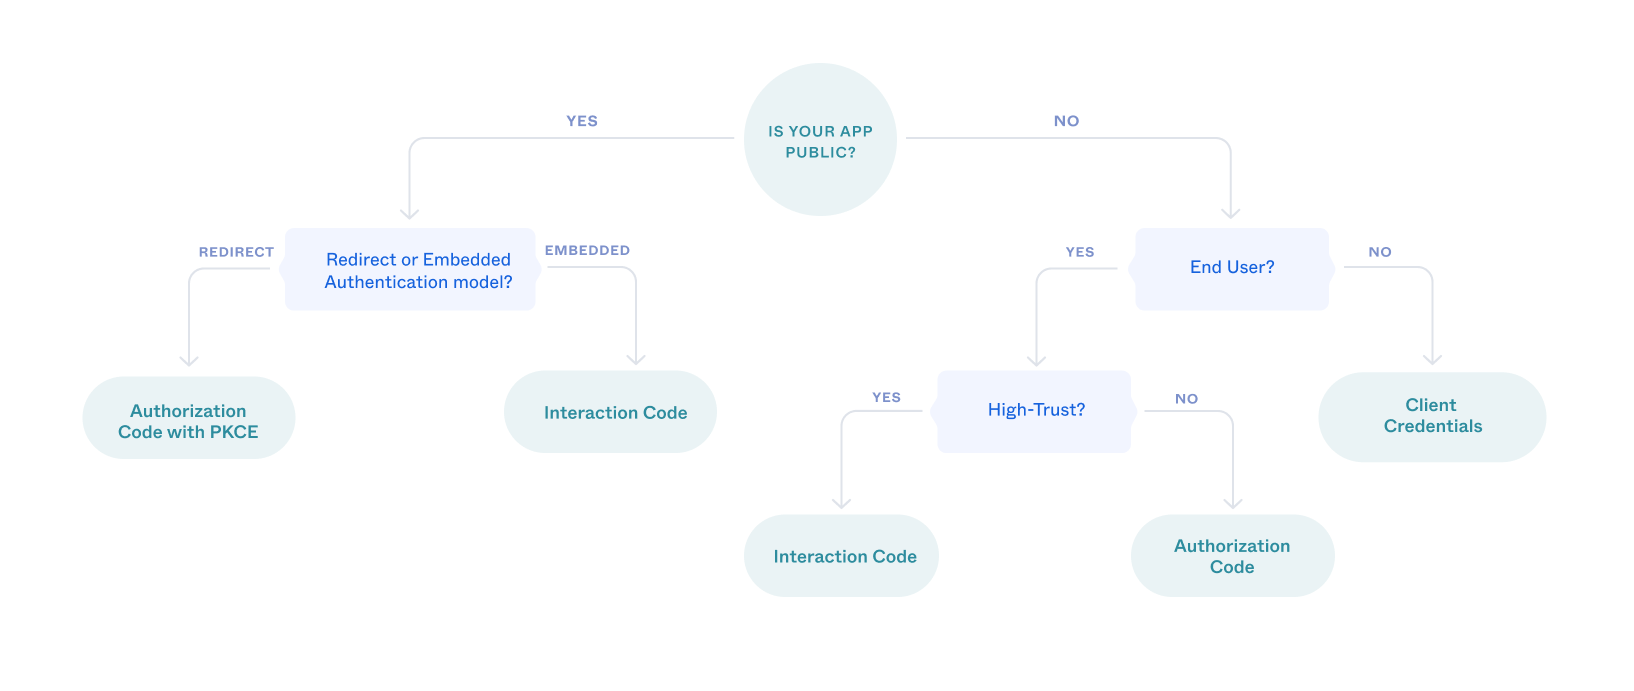 Decision tree for choosing the correct OAuth 2.0 flow based on the type of client being built